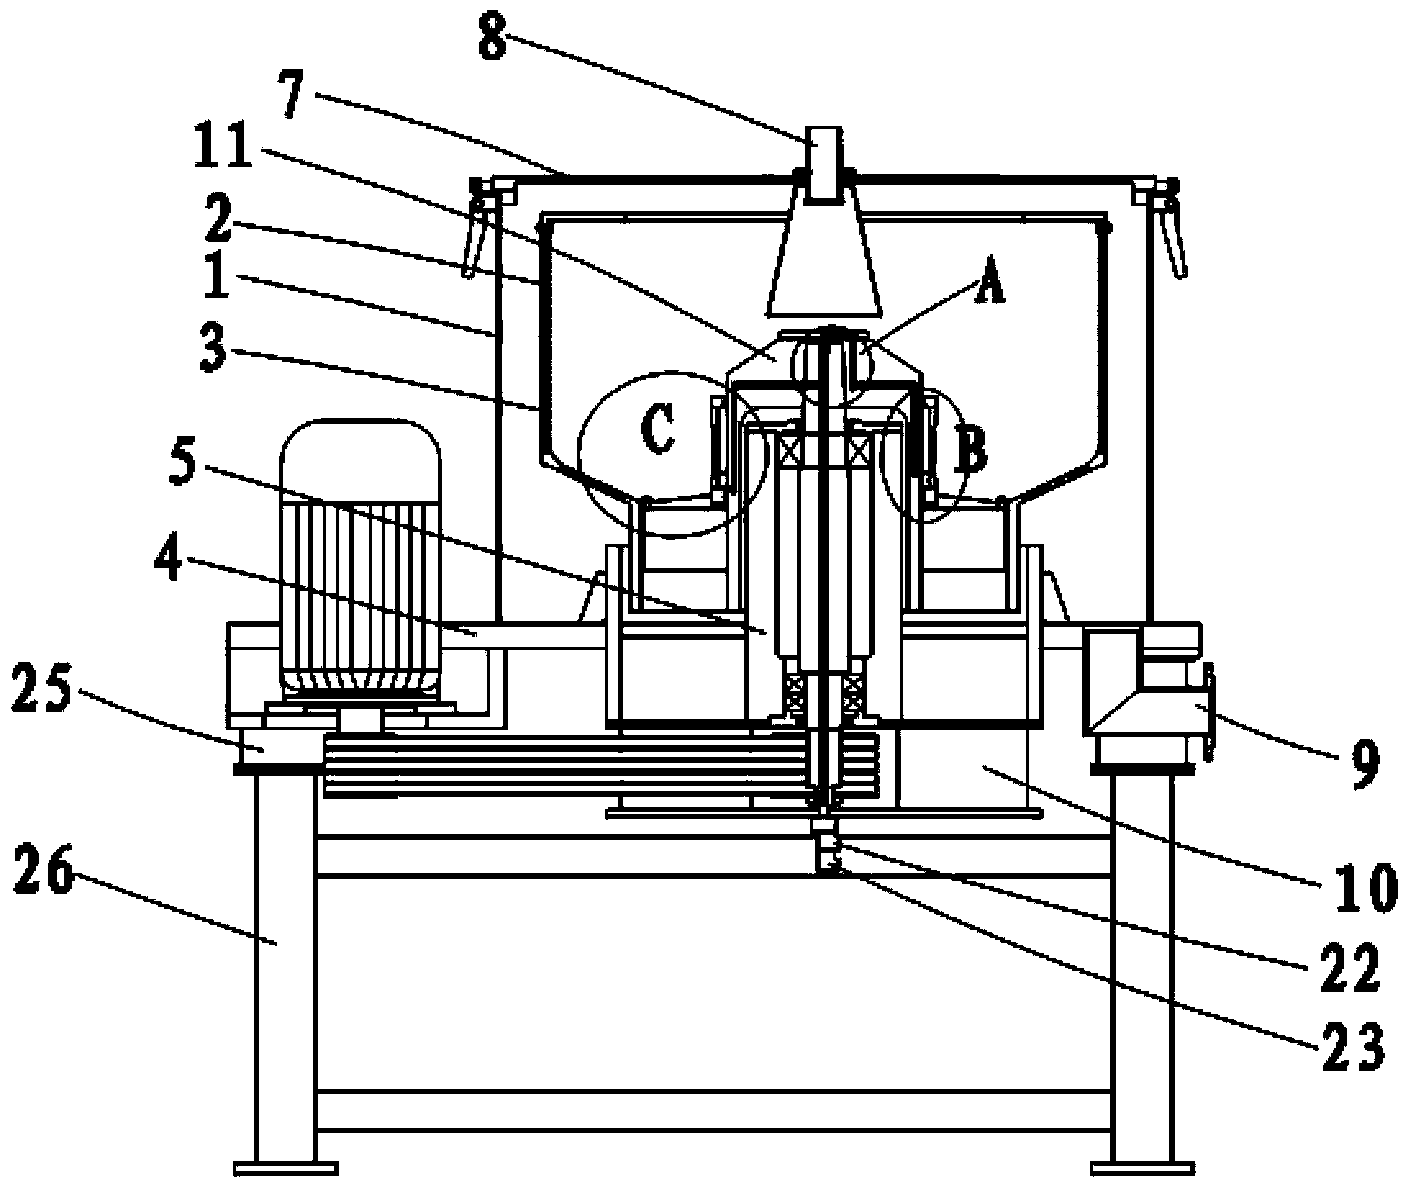 Unloading type centrifugal machine with filter bag conducting reciprocating vibration